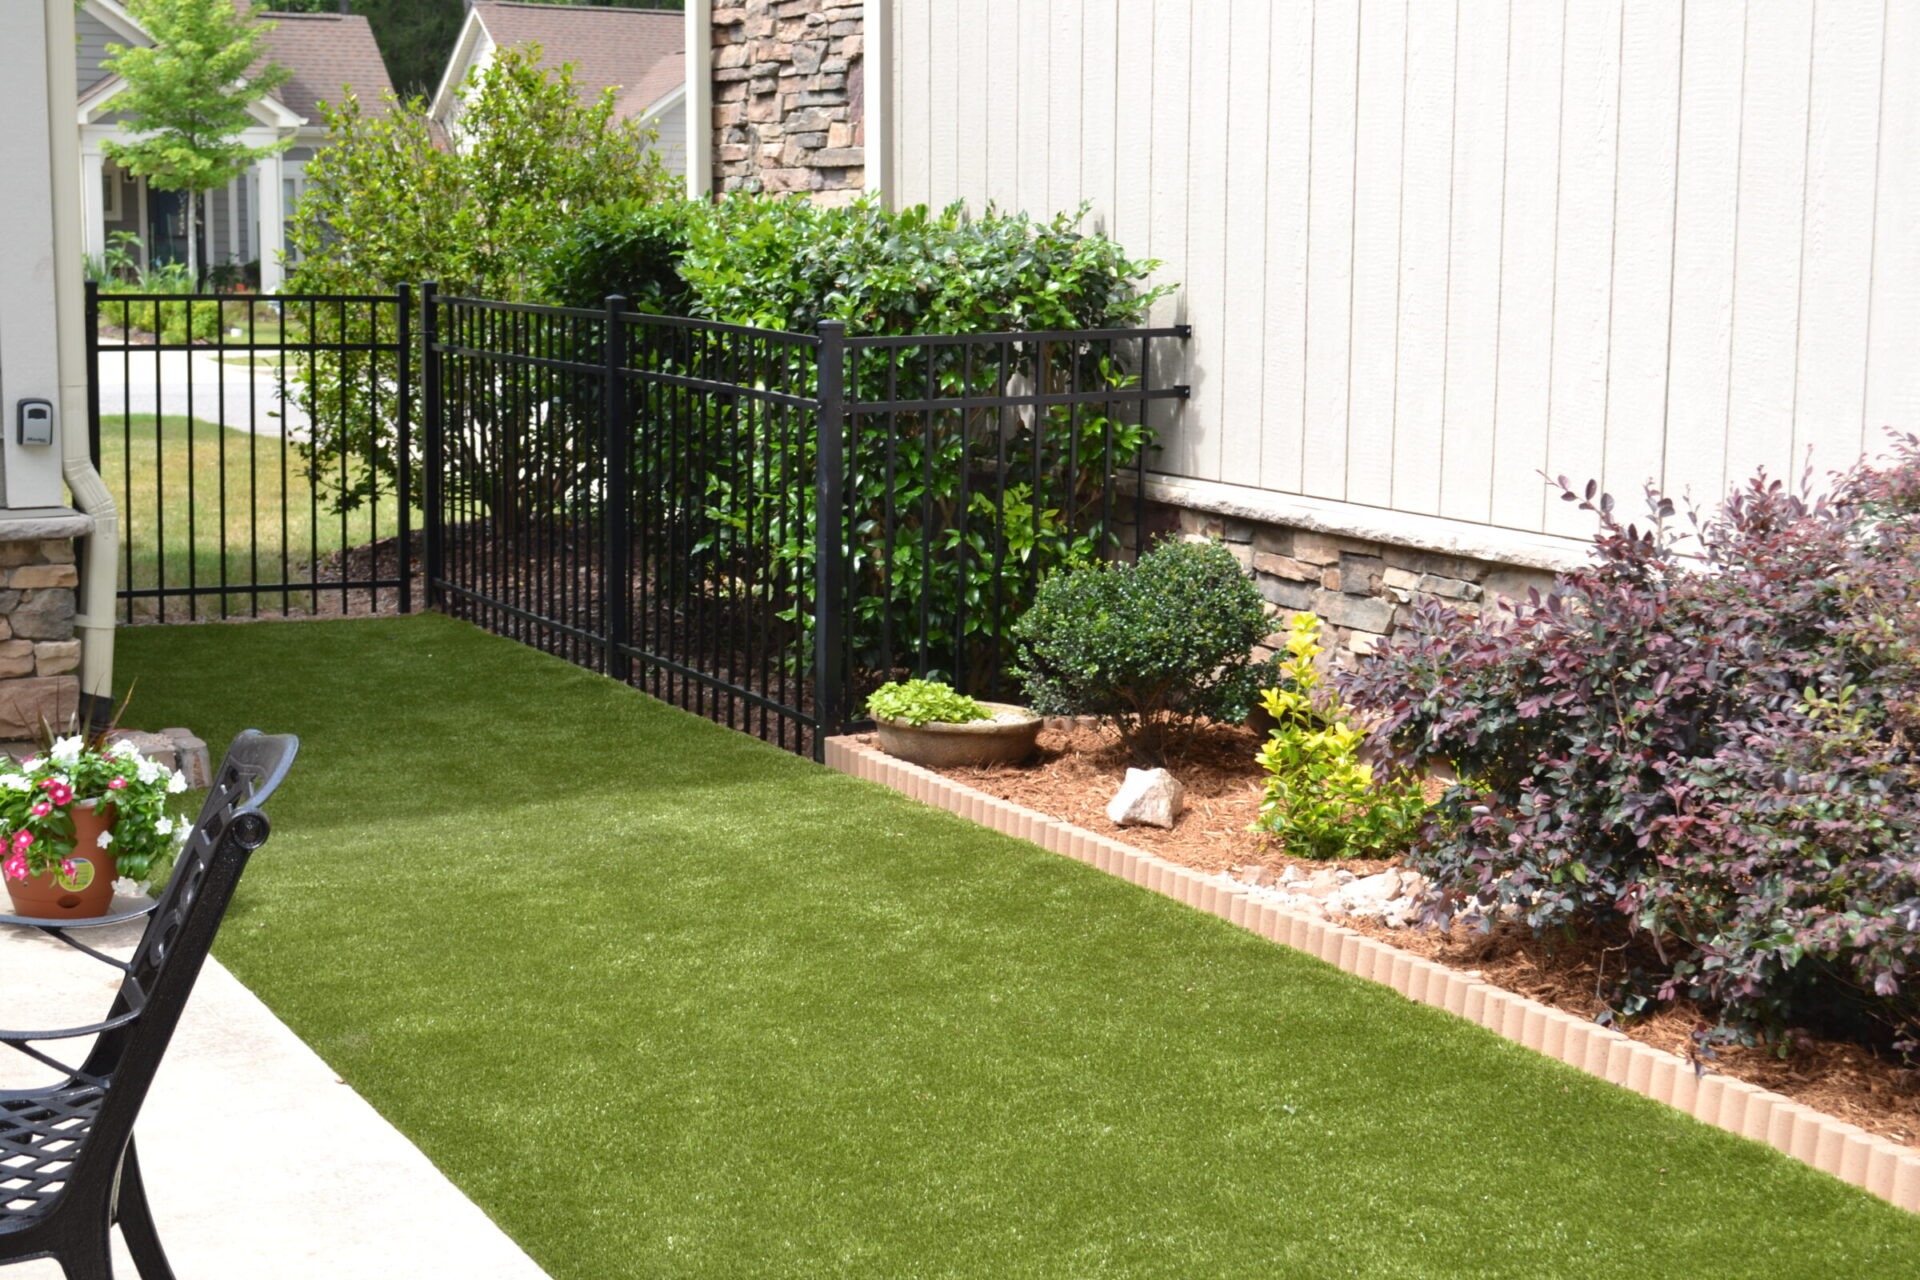 This image shows a neatly landscaped backyard with artificial grass, a metal fence, assorted shrubs, a potted plant, and a patio chair.